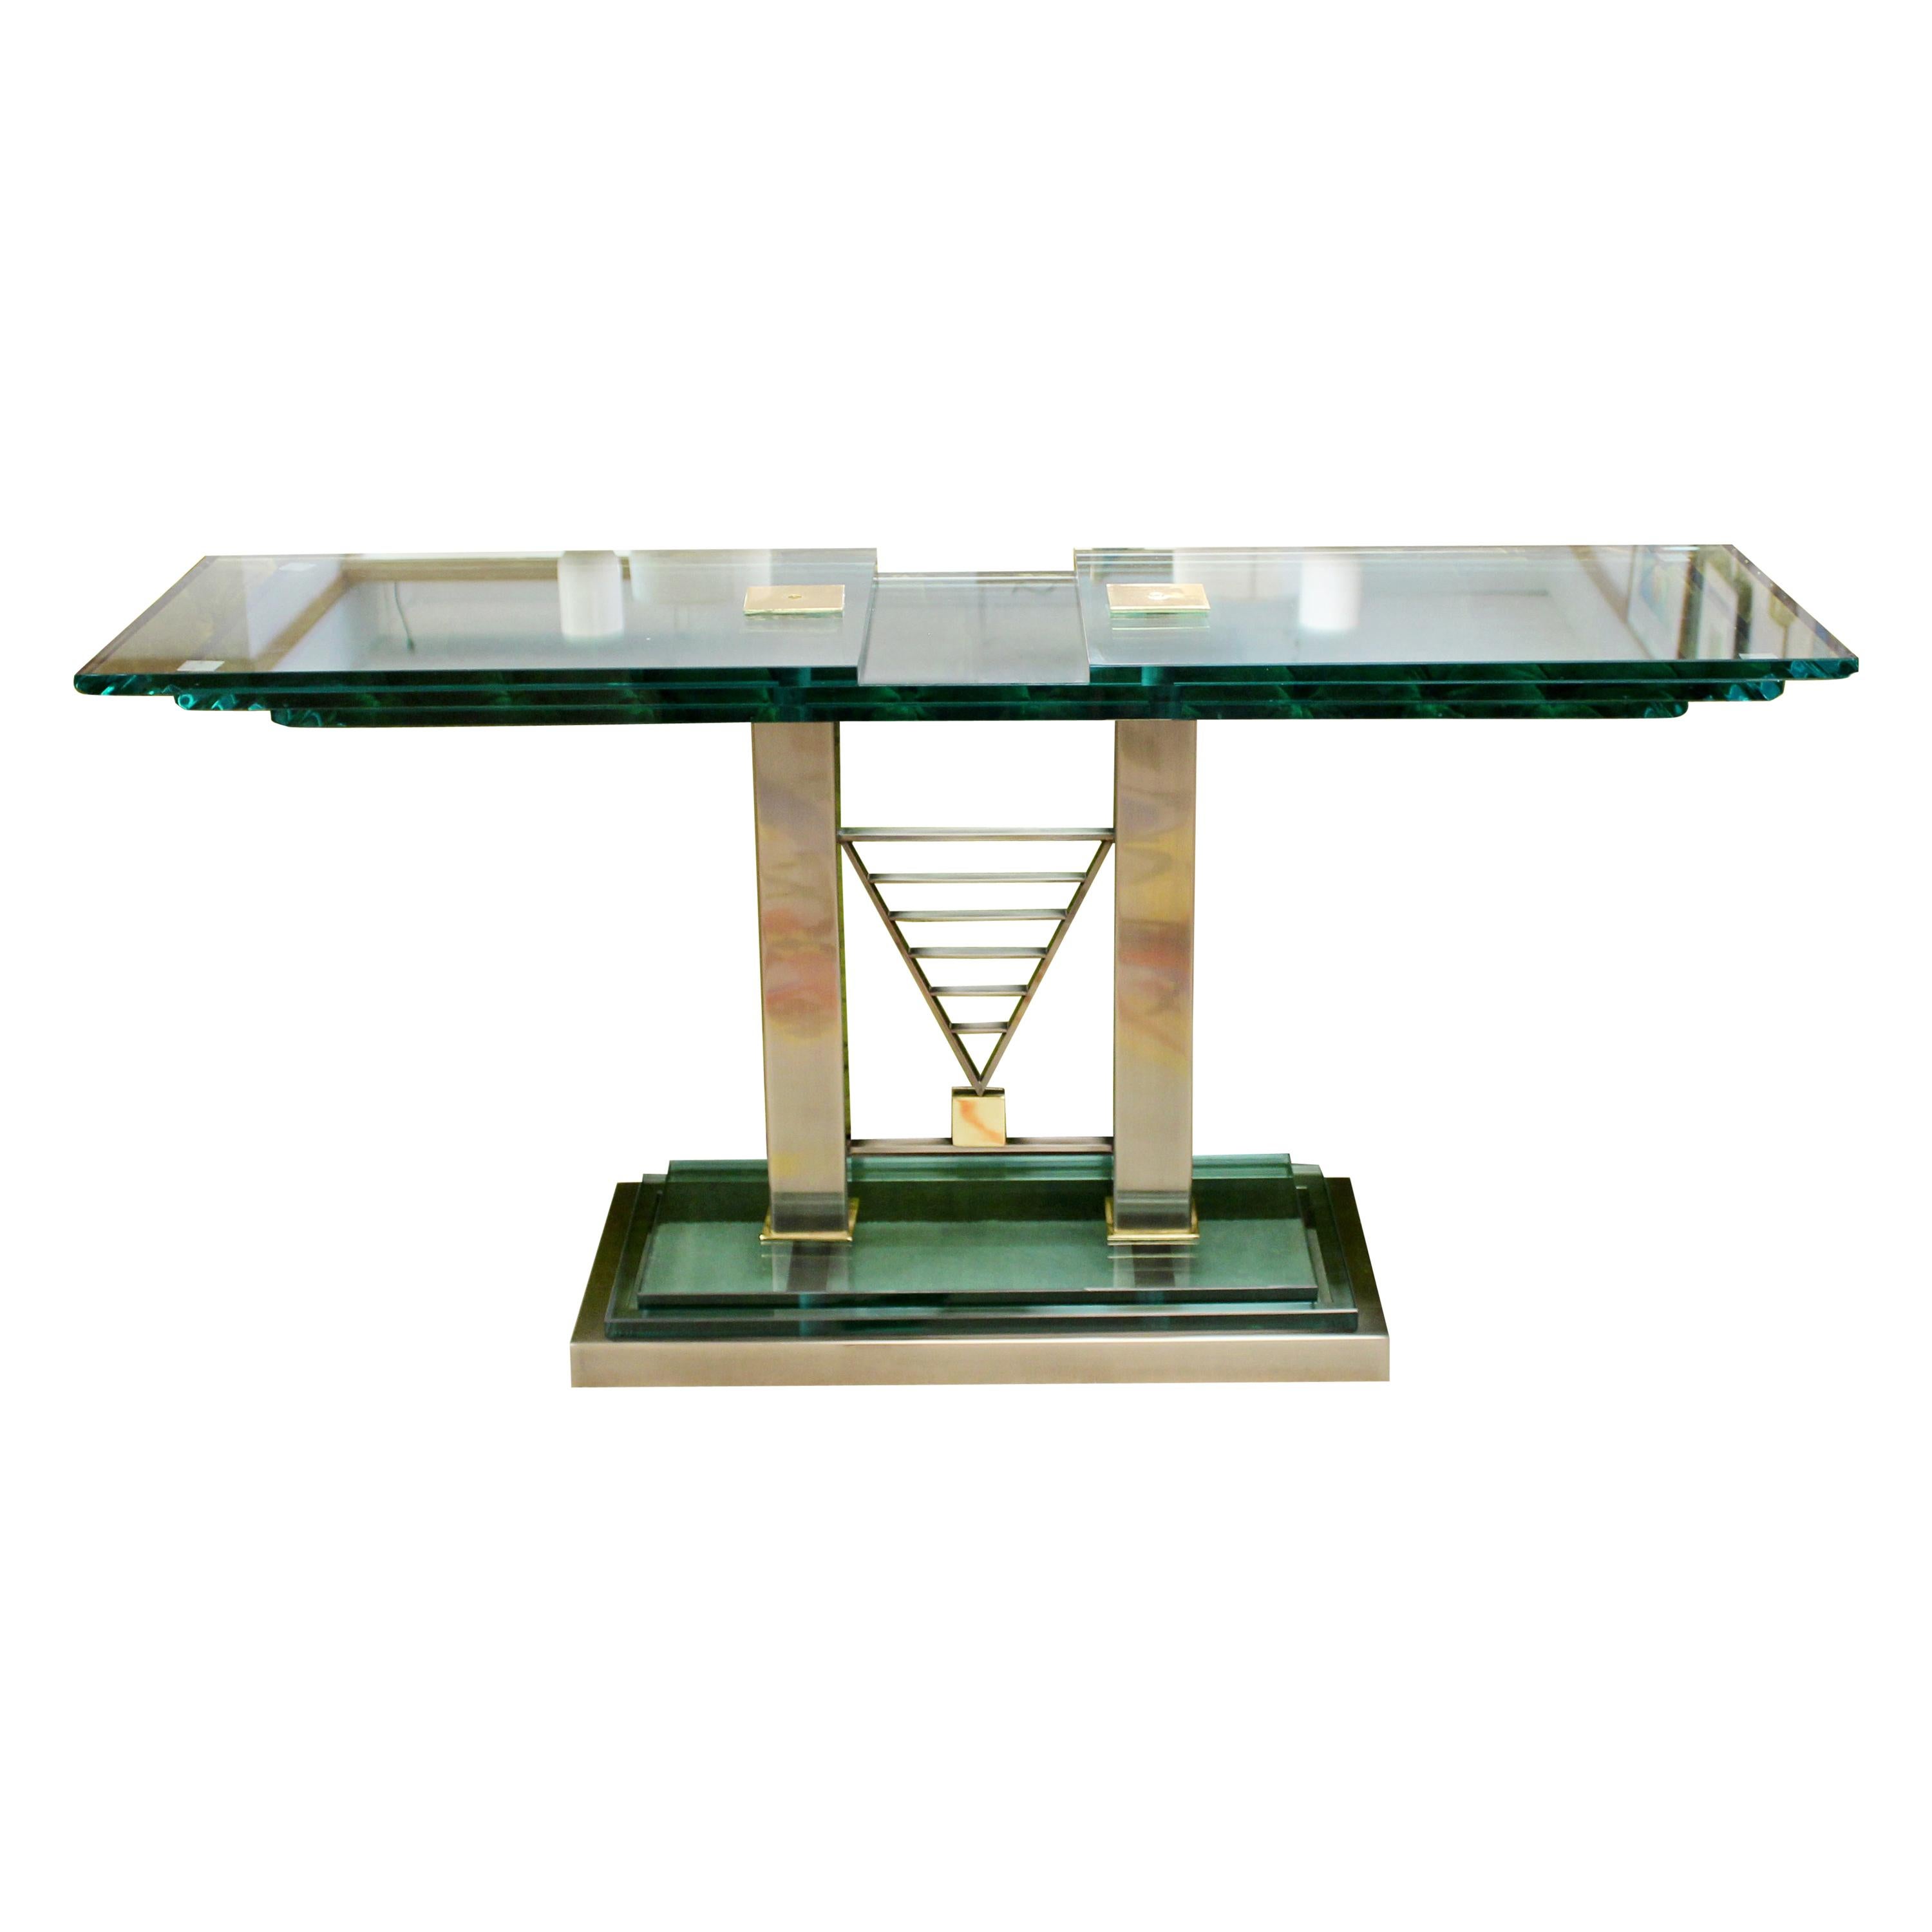 Art Deco Style Console Table Brass Glass Chrome Steel by DIA Design Institute